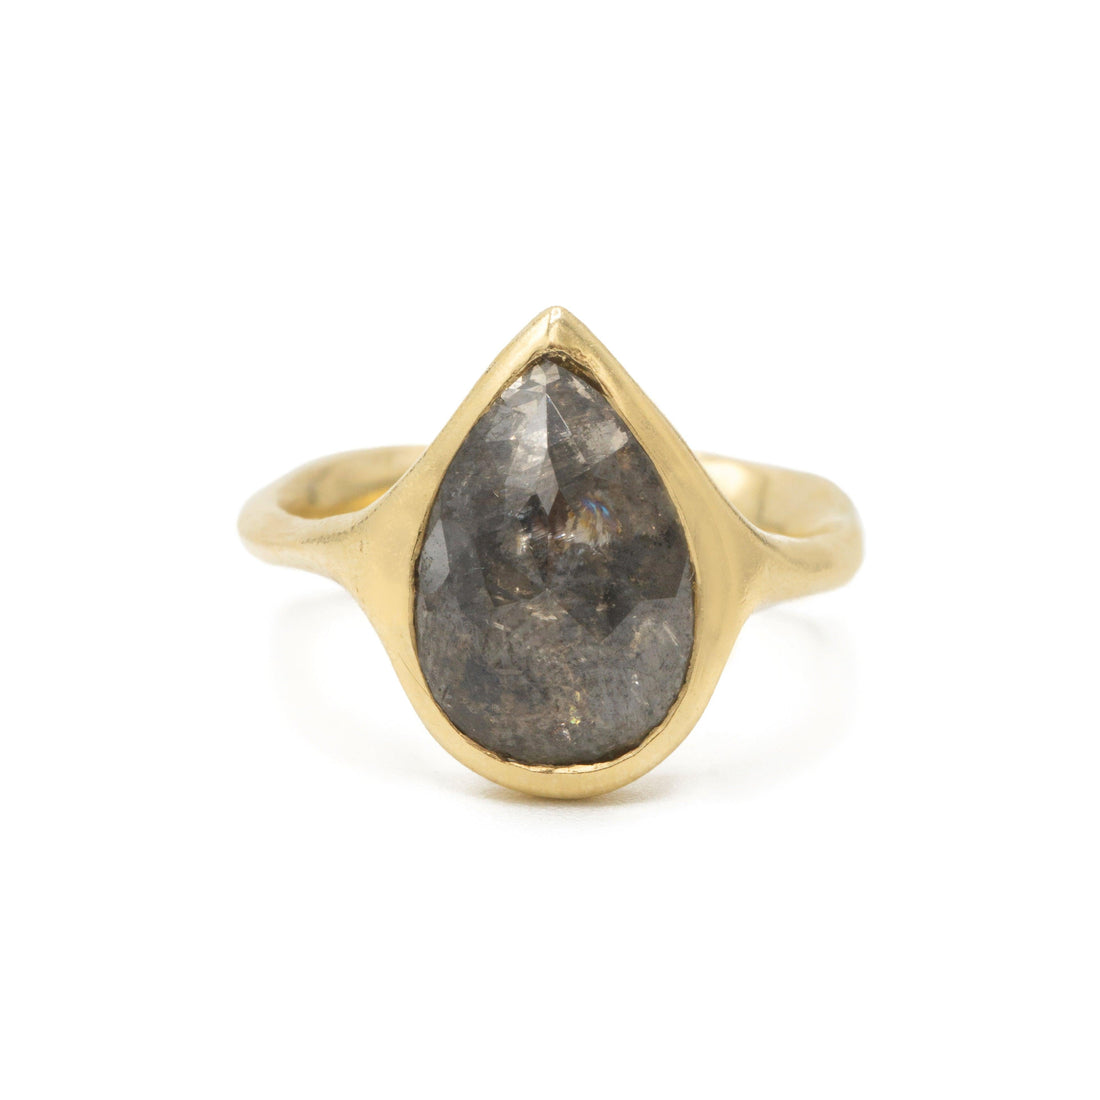 Althea Solitaire with pear shaped salt and pepper black diamond by Erin Cuff Jewelry.